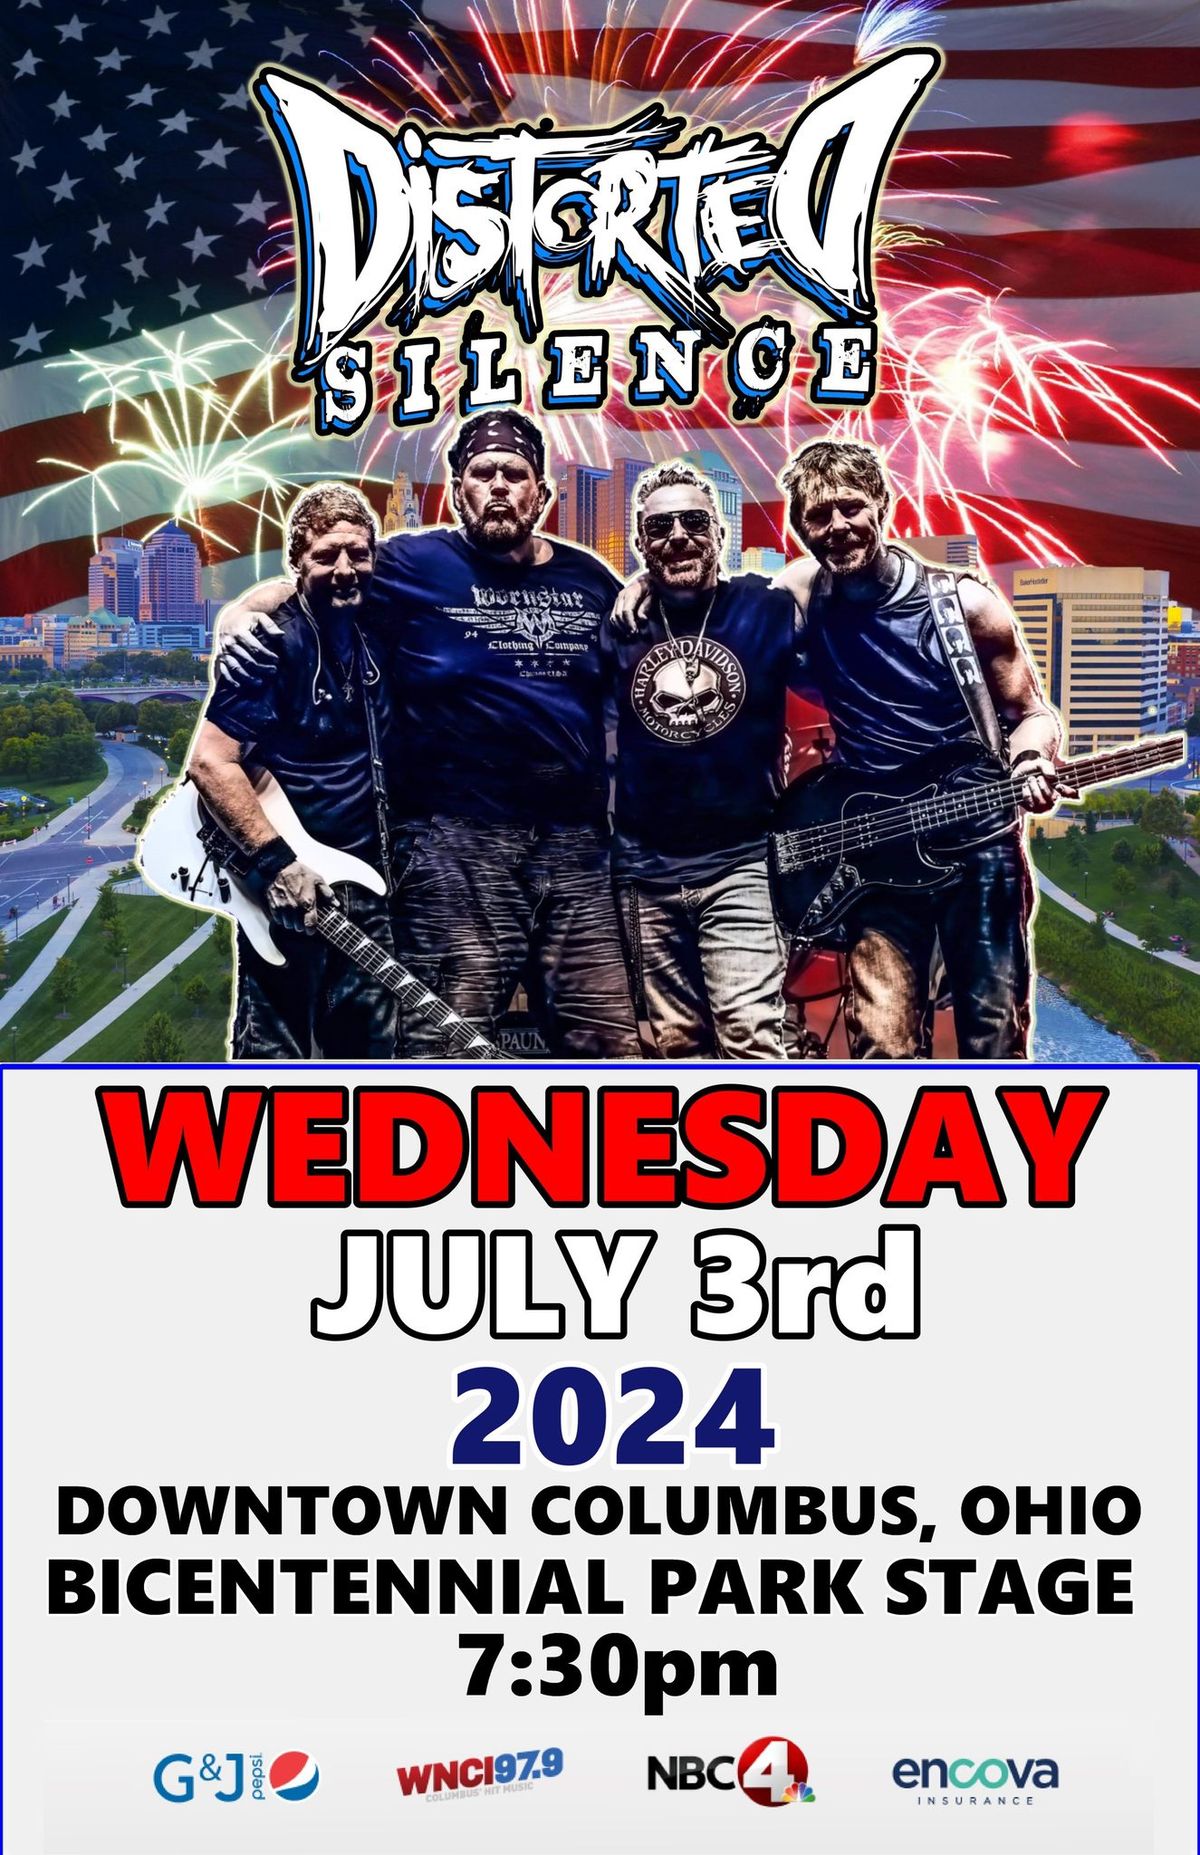 RED WHITE & BOOM DISTORTED SILENCE (Bicentennial Stage)